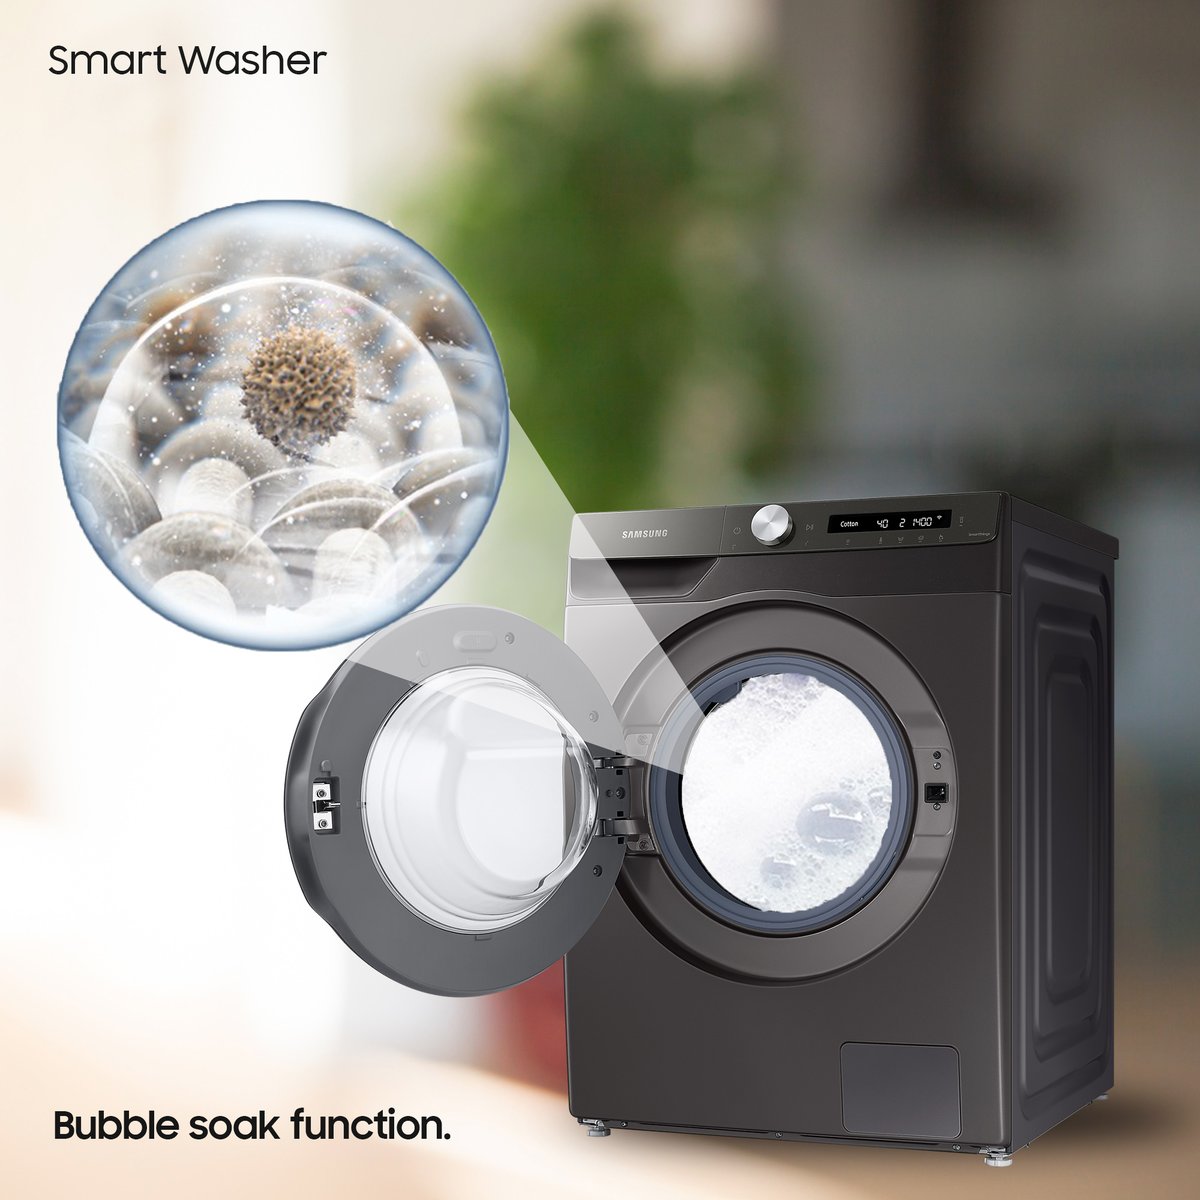 The Bubble Soak function of our Smart Washer helps remove a wide variety of stubborn stains like food, wine, and make up. Available at all authorized Samsung stores nationwide. #SamsungNigeria #StayConnectedWithSamsung